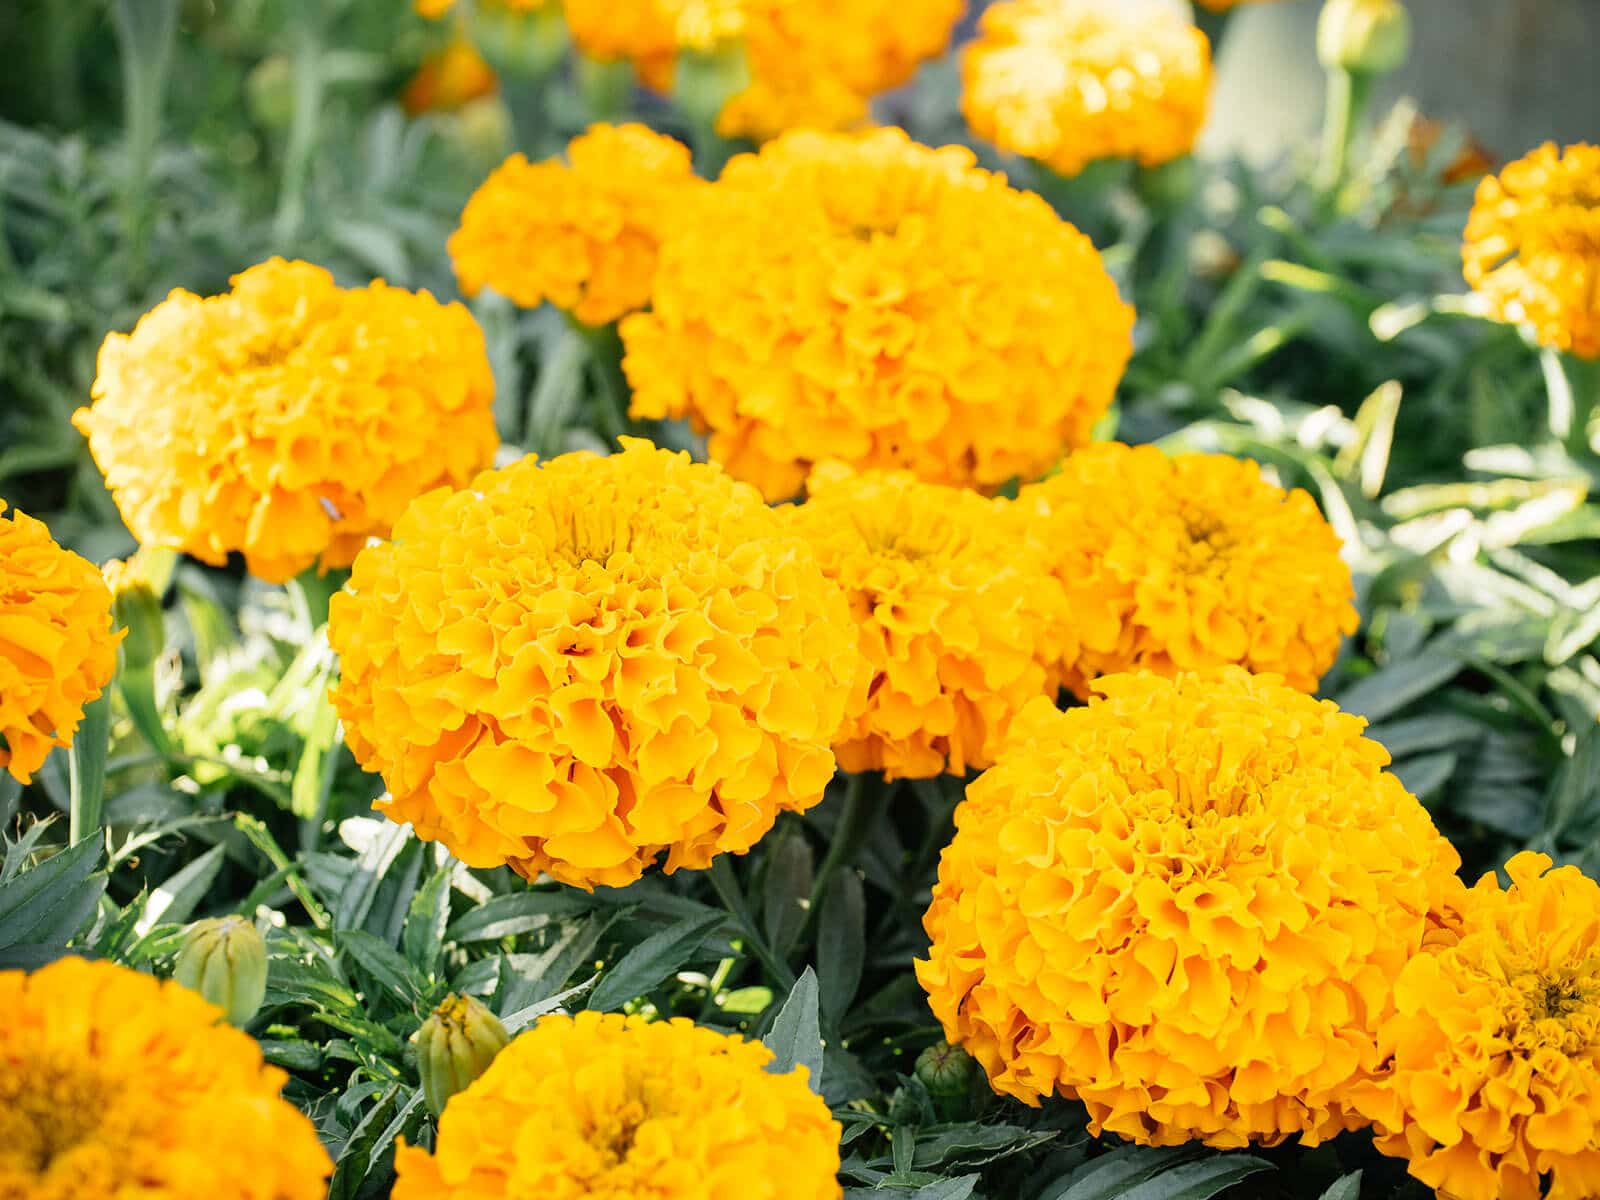 Certain plants like marigolds have strong scents that deter aphids